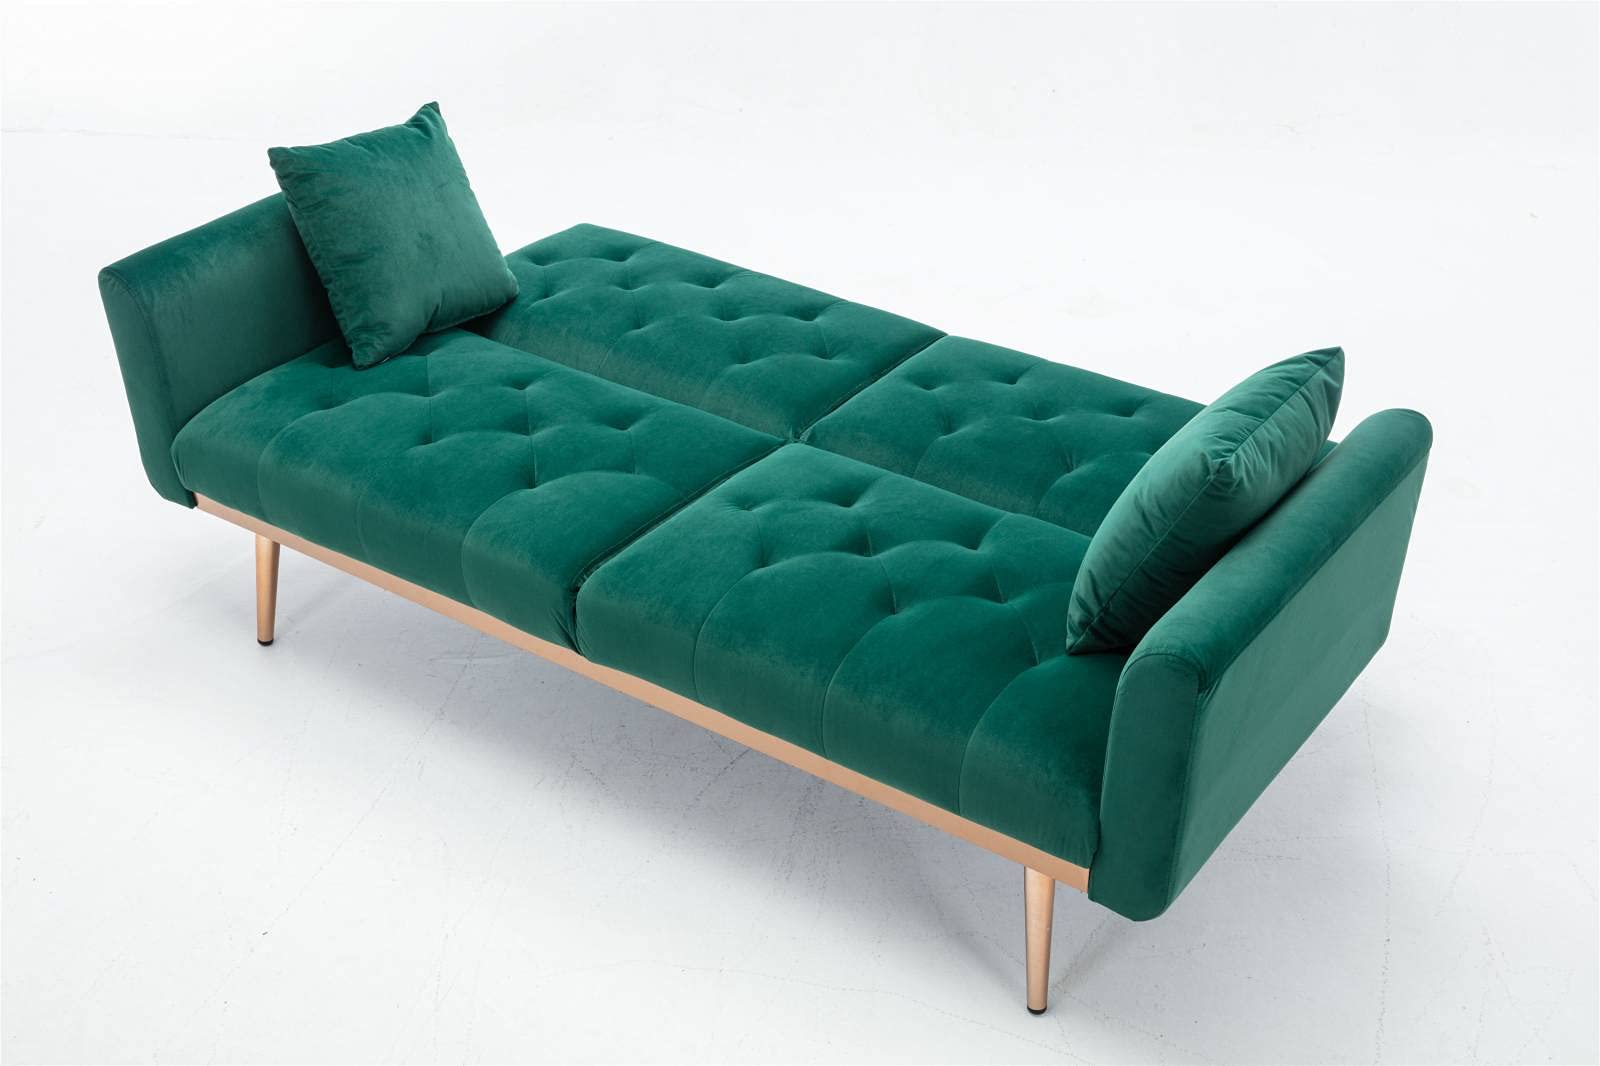 SZLIZCCC 63" Green Velvet Couch, Tufted Loveseat Sofa, Convertible Futon Sofa Bed, Accent Sofa Recliner, Golden Metal Legs, 2 Couch Pillows, Mid Century Modern Sofas for Home Living Room Bedroom